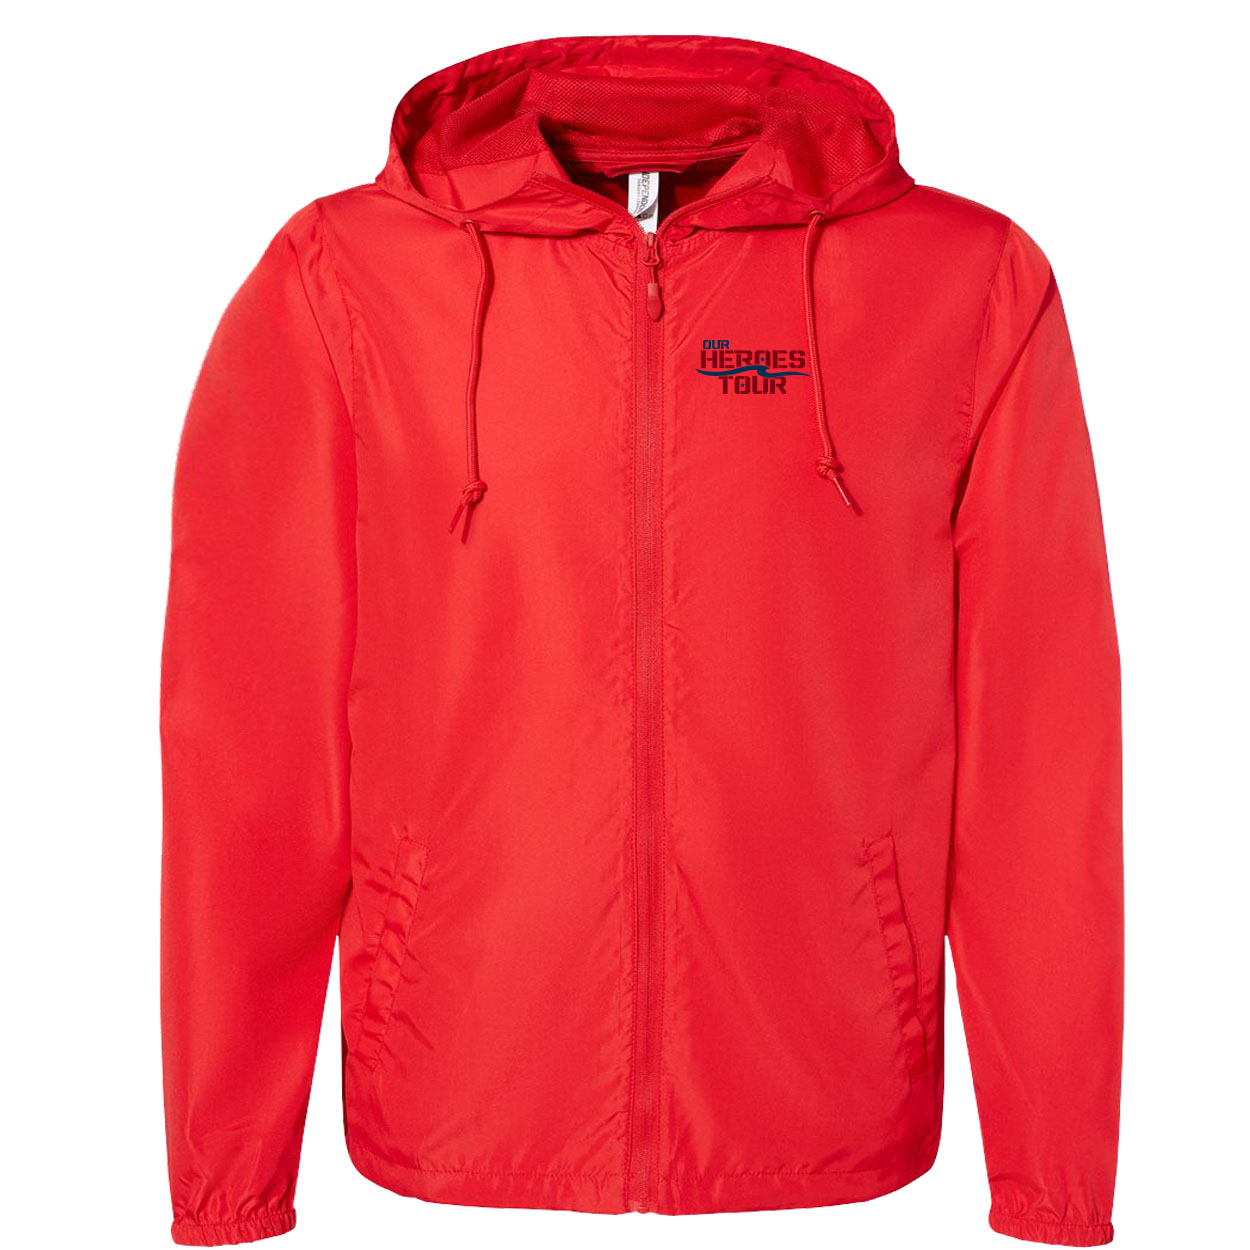 Our Heroes Tour Night Out Lightweight Windbreaker Red